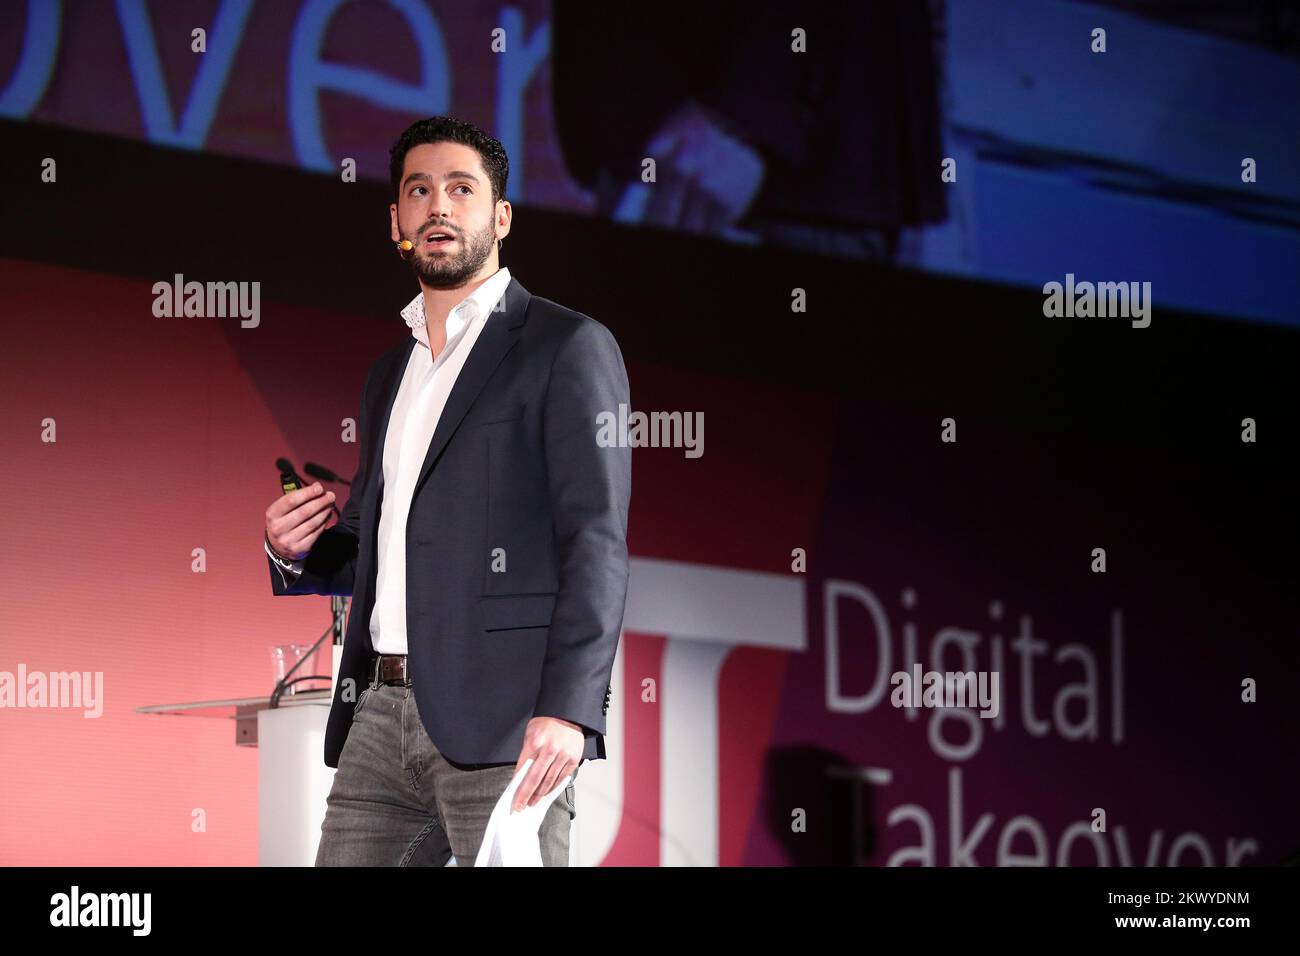 General Manager for Uber in Central and Eastern Europe Rob Khazzam speaks  at Digital Takeover conference in Zagreb, Croatia on March 14, 2016. In his  presentation Digital Croatia or La La Land?.